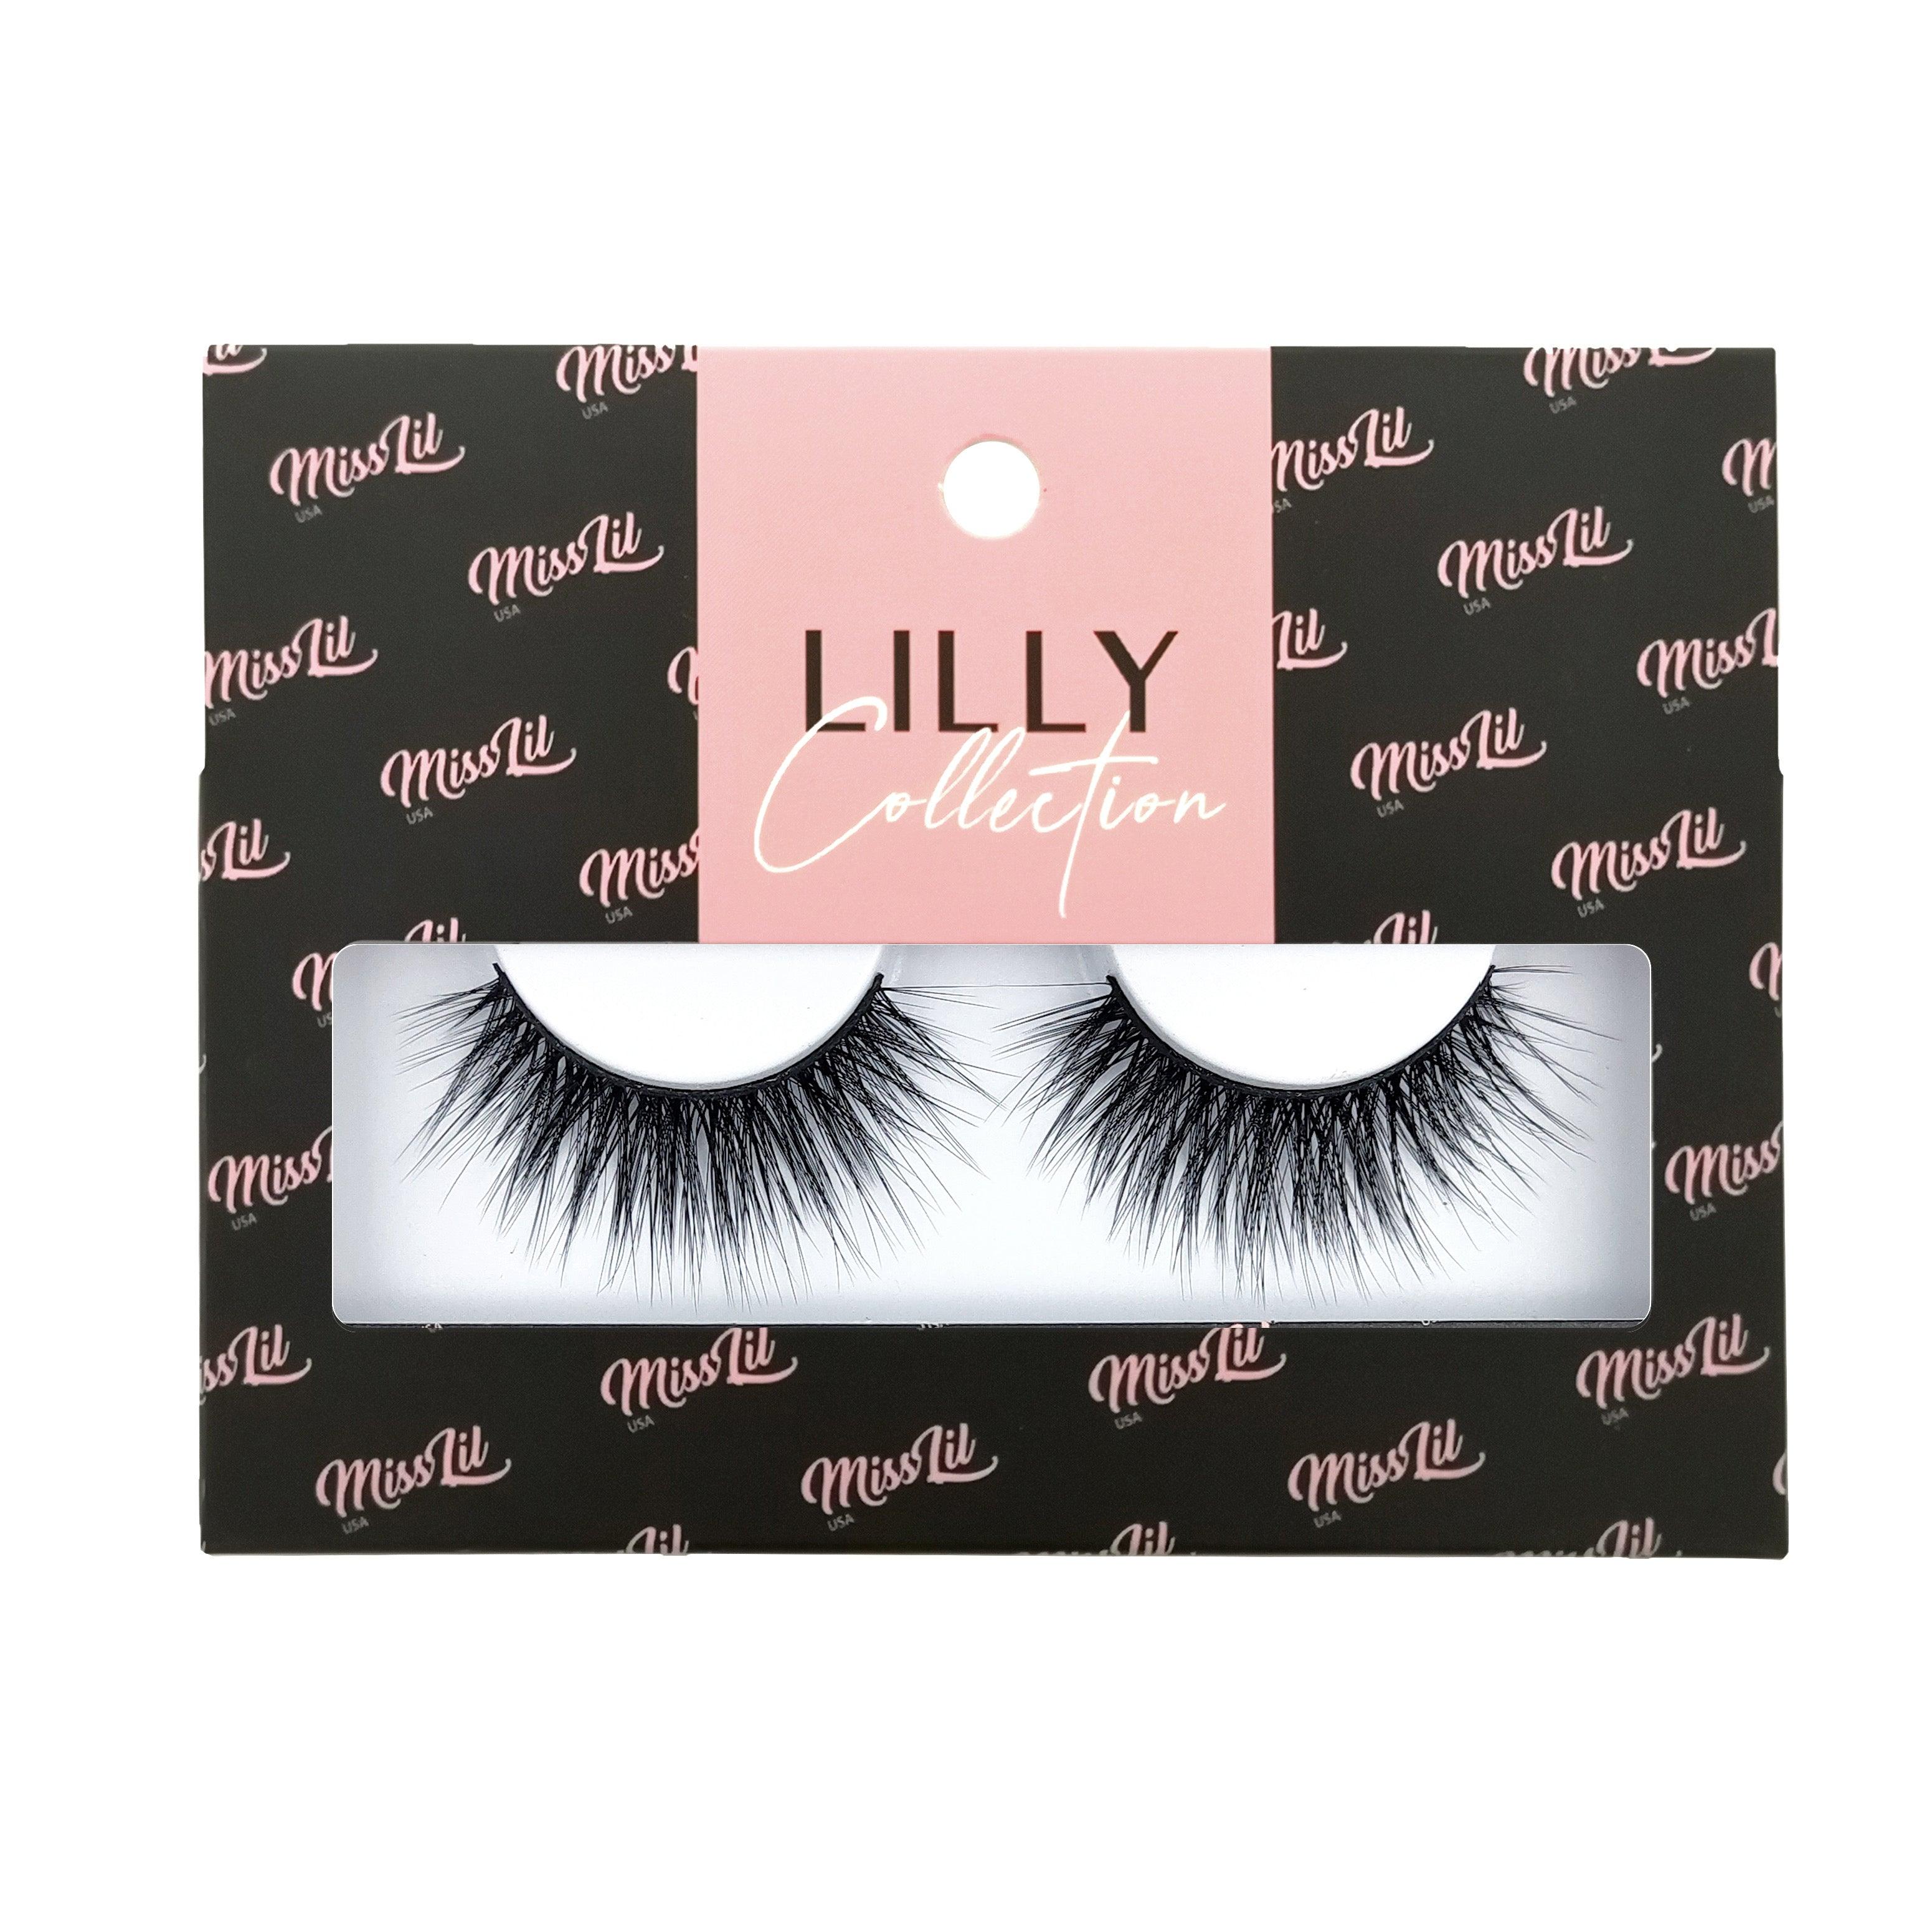 1-Pair Lashes-Lilly Collection #31 (Pack of 12) - Miss Lil USA Wholesale